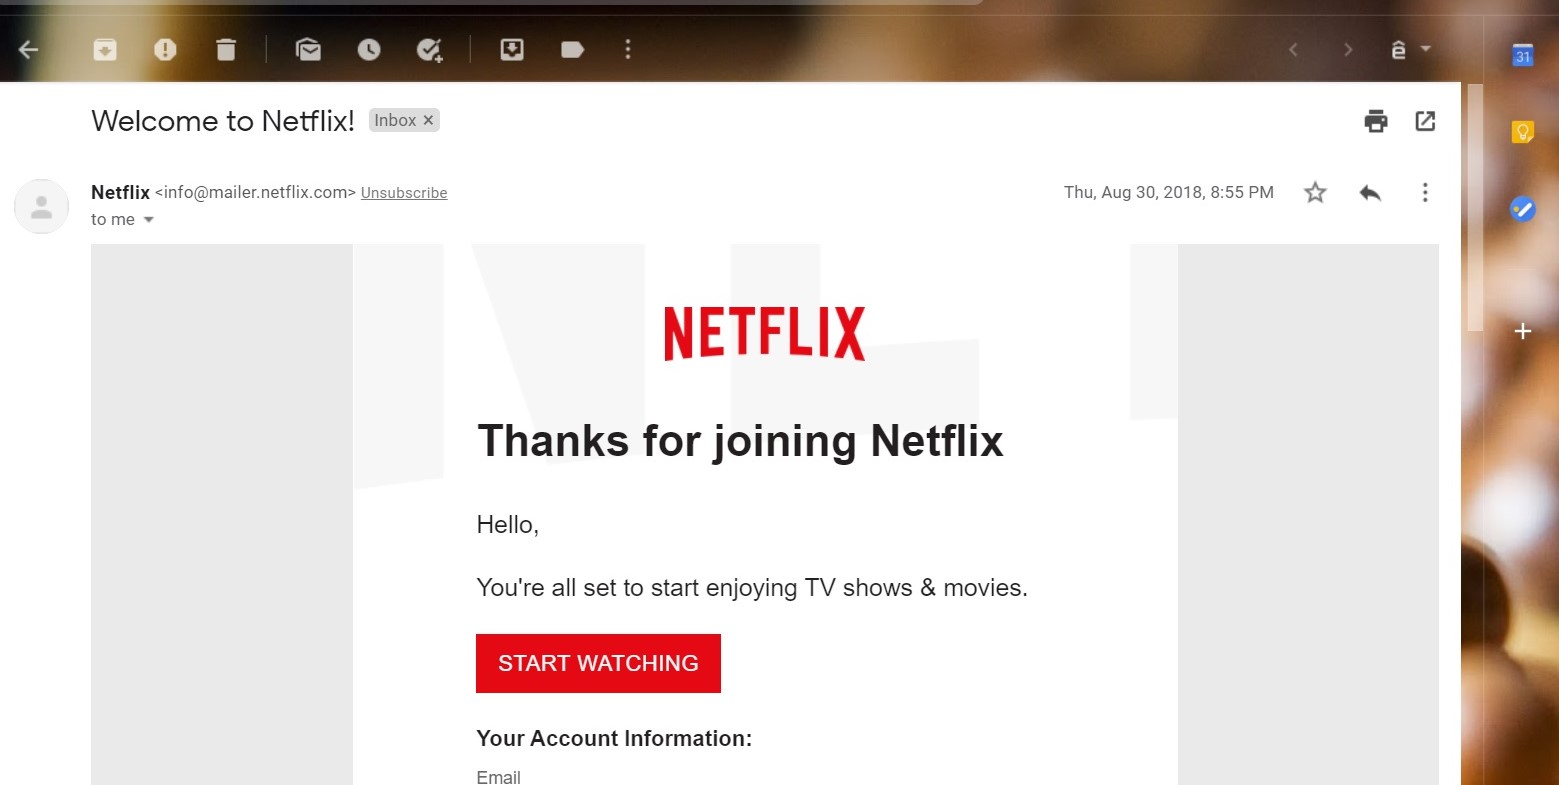 Subcription confirmation from Netflix